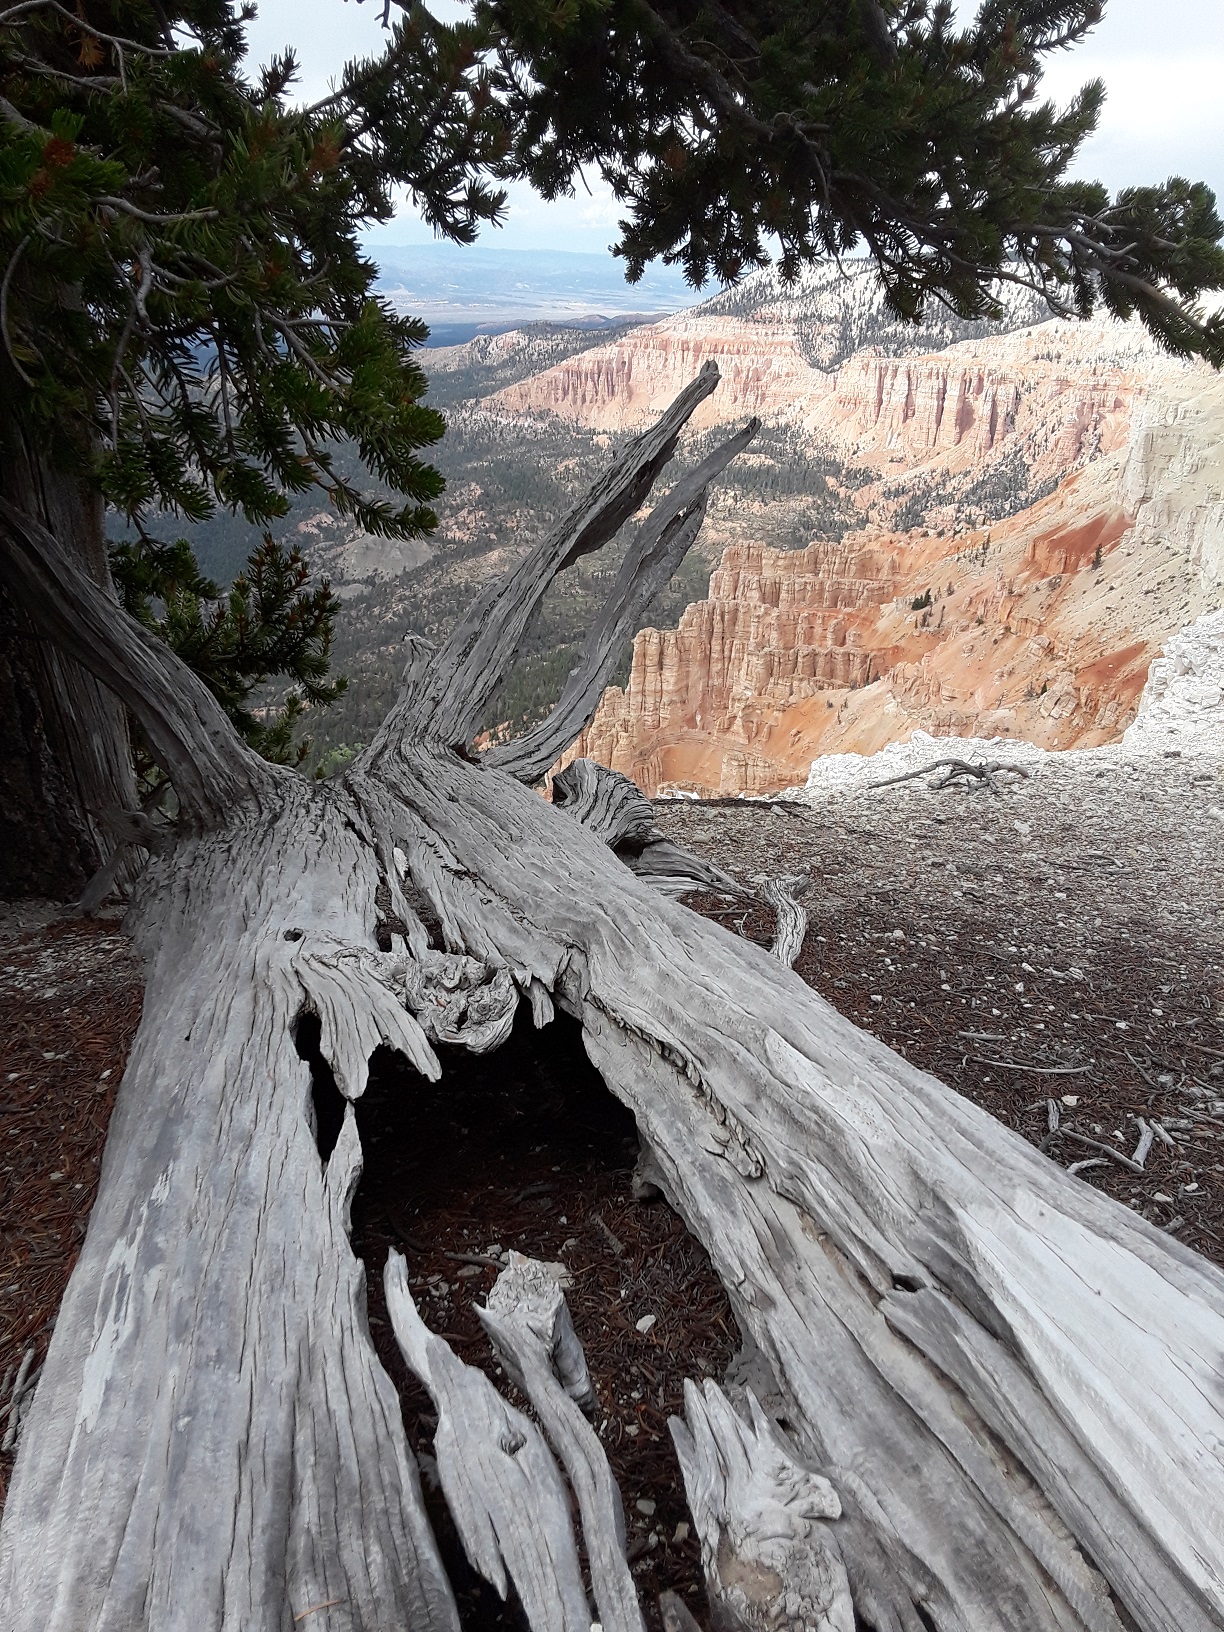 An old log and red sandstone cliffs as seen from the Powell Point trail